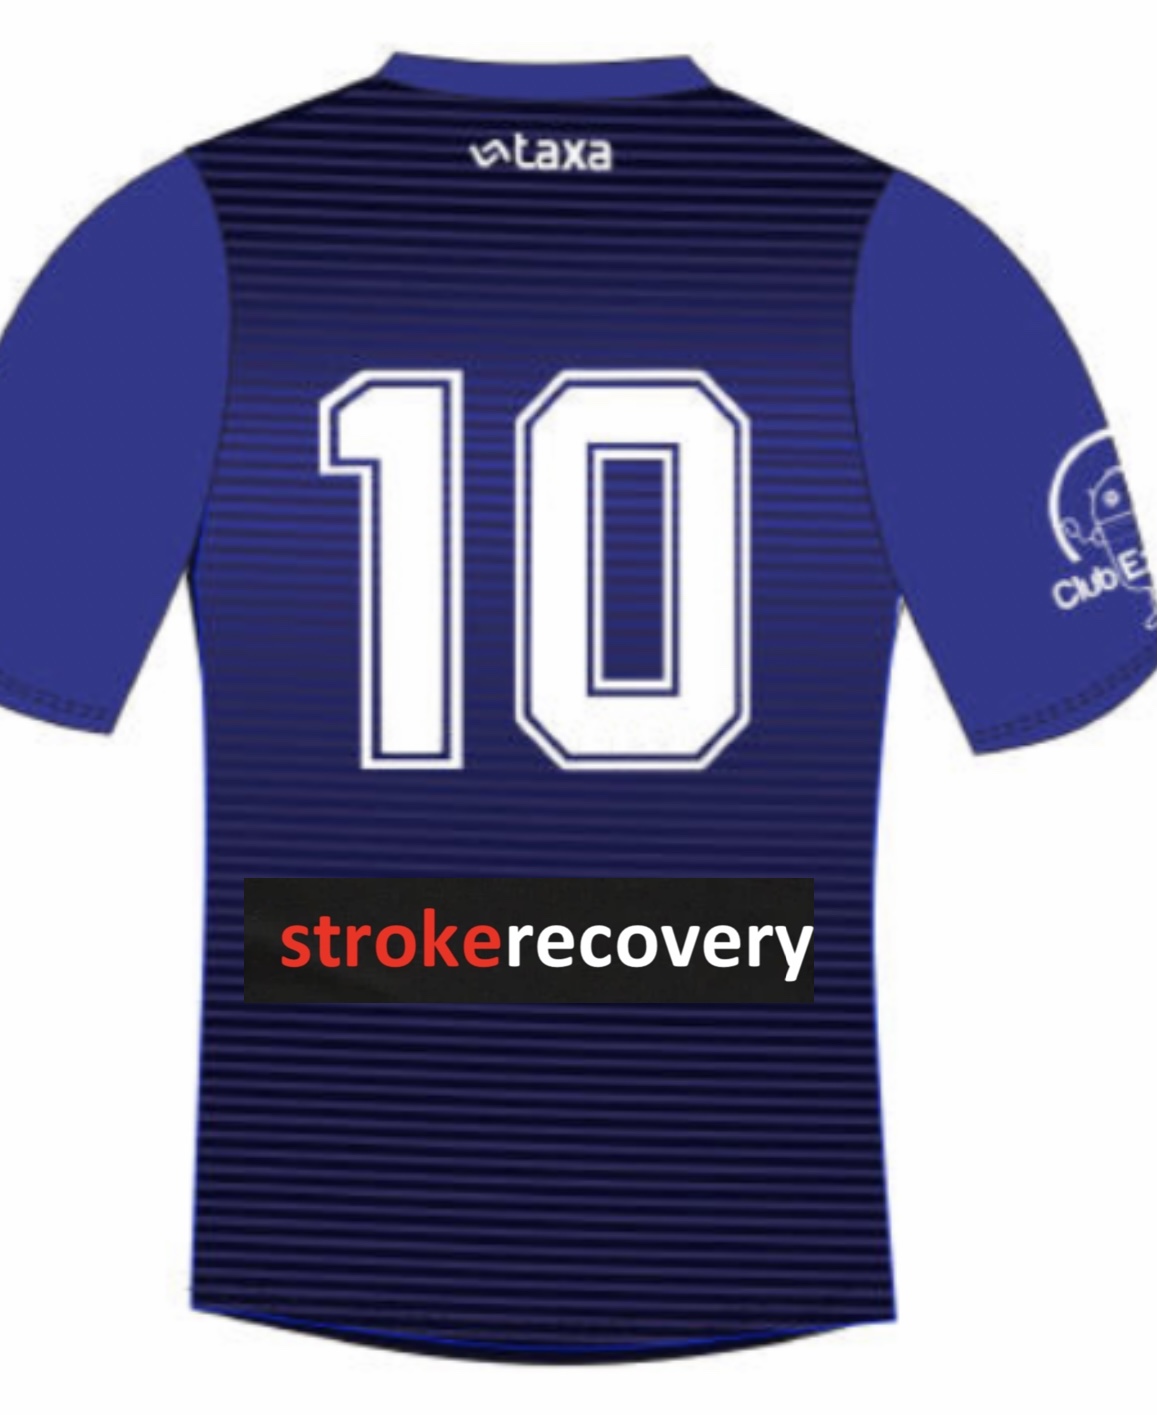 strokerecovery Gladesville Ryde Magic FC